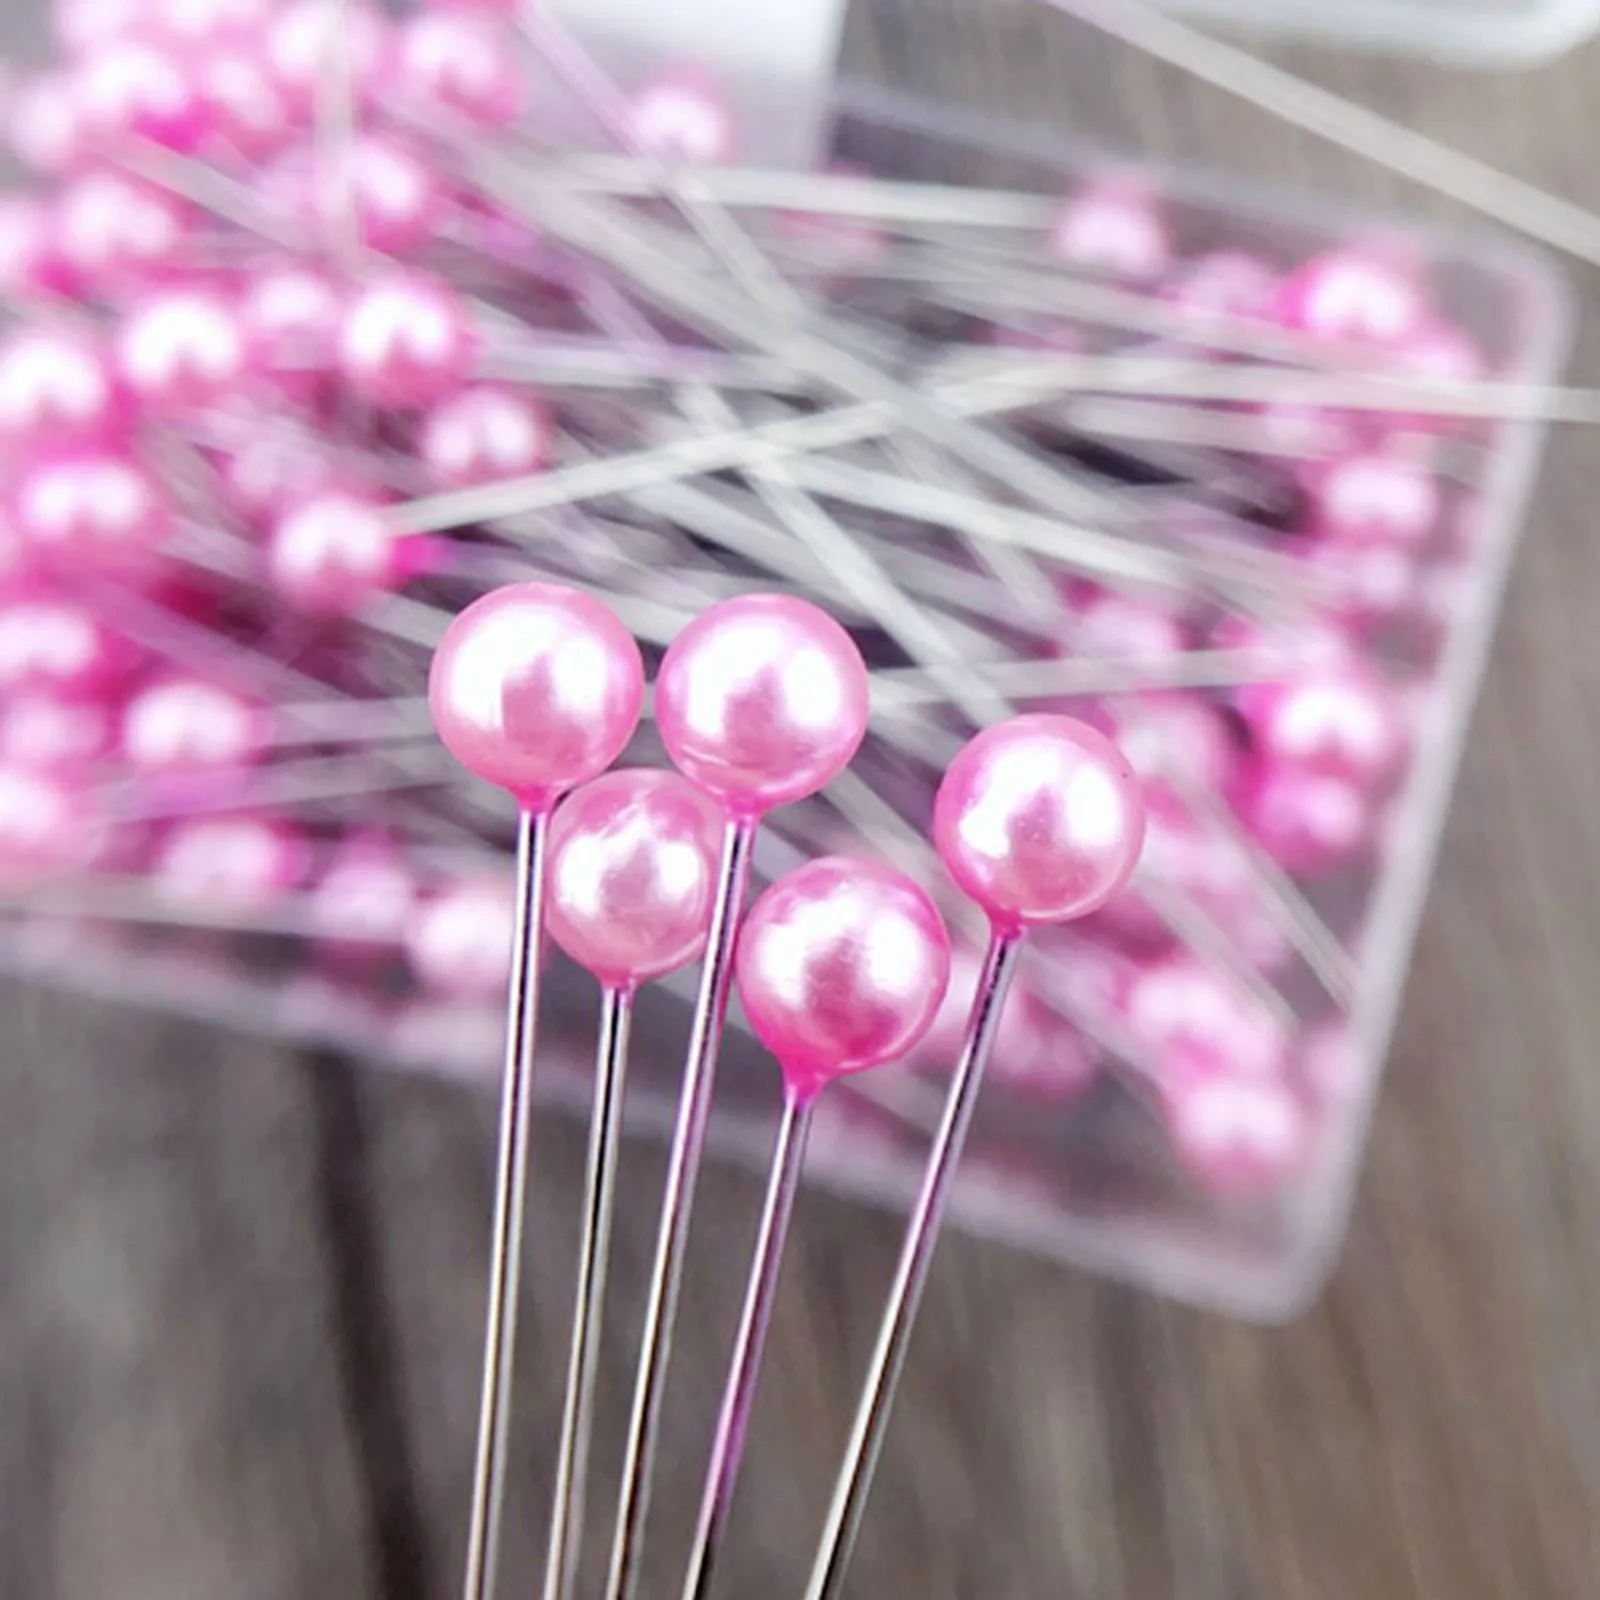 

100pcs Colorful Round Pearl Head Dressmaking Pins Needles Sewing Stitch DIY Craft Wedding Corsage Positioning Box Sewing Tools